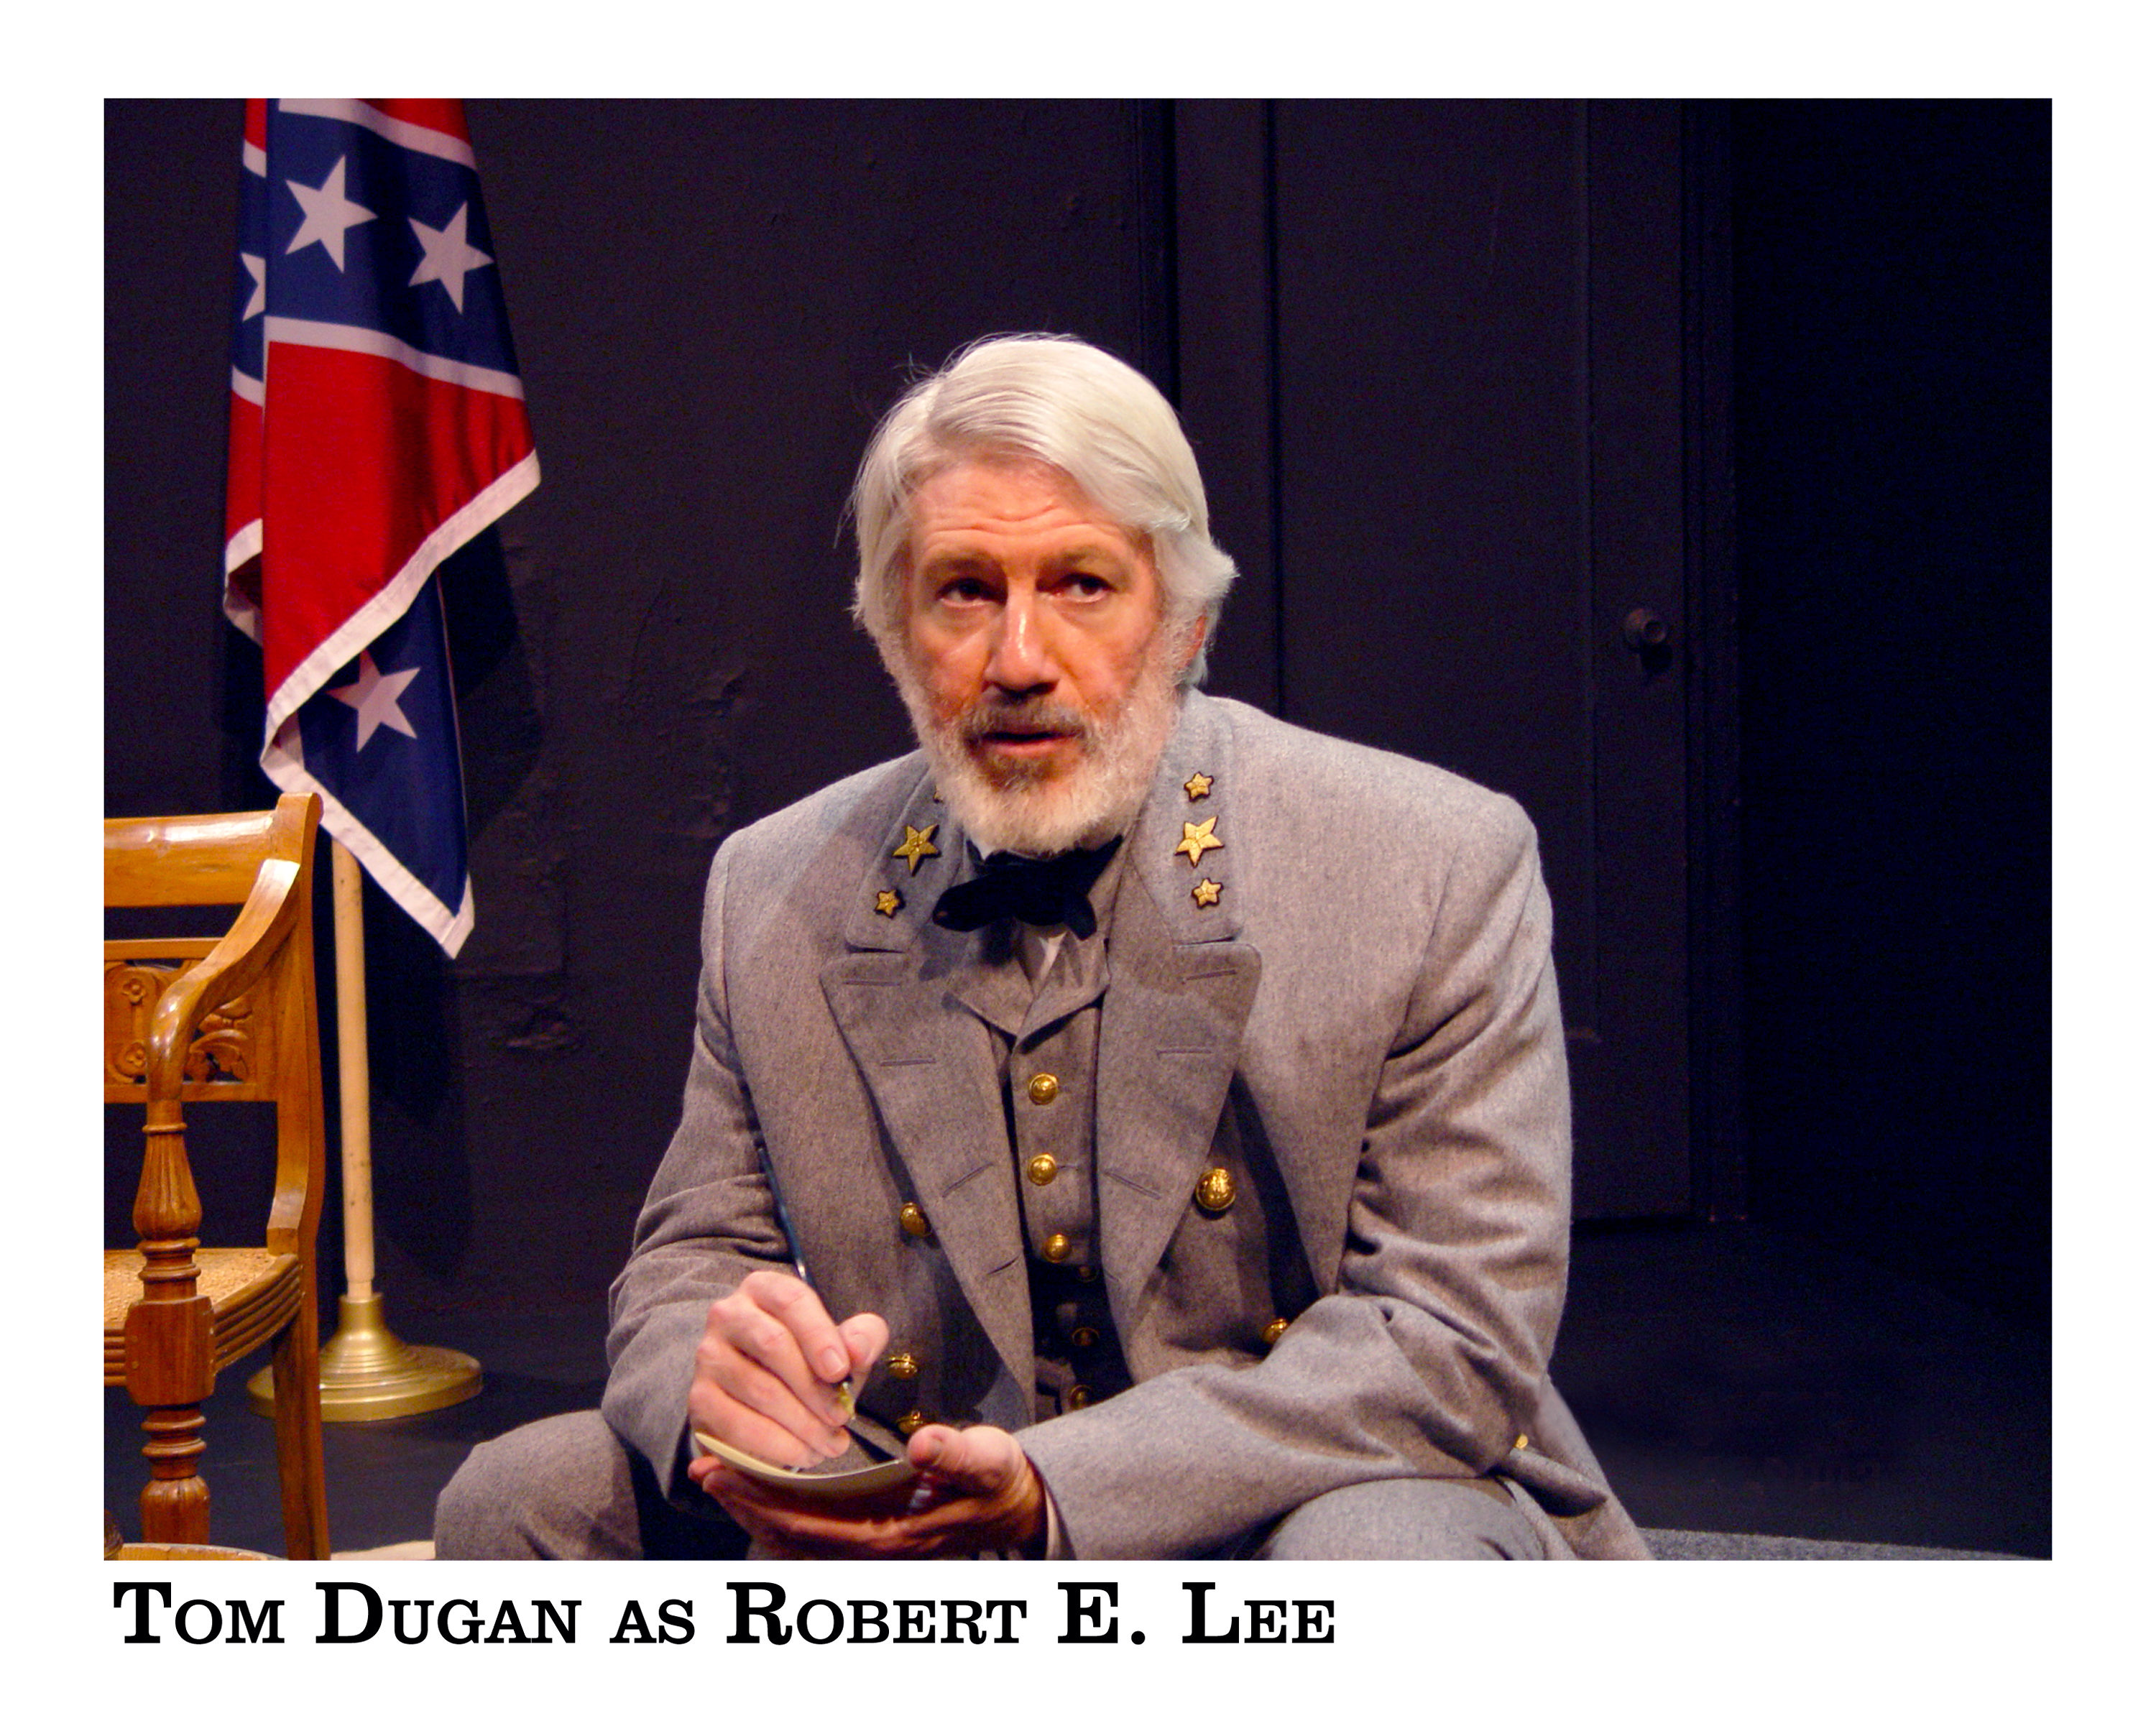 Tom Dugan Plays Robert E. Lee in “Shades of Gray” at the Rubicon